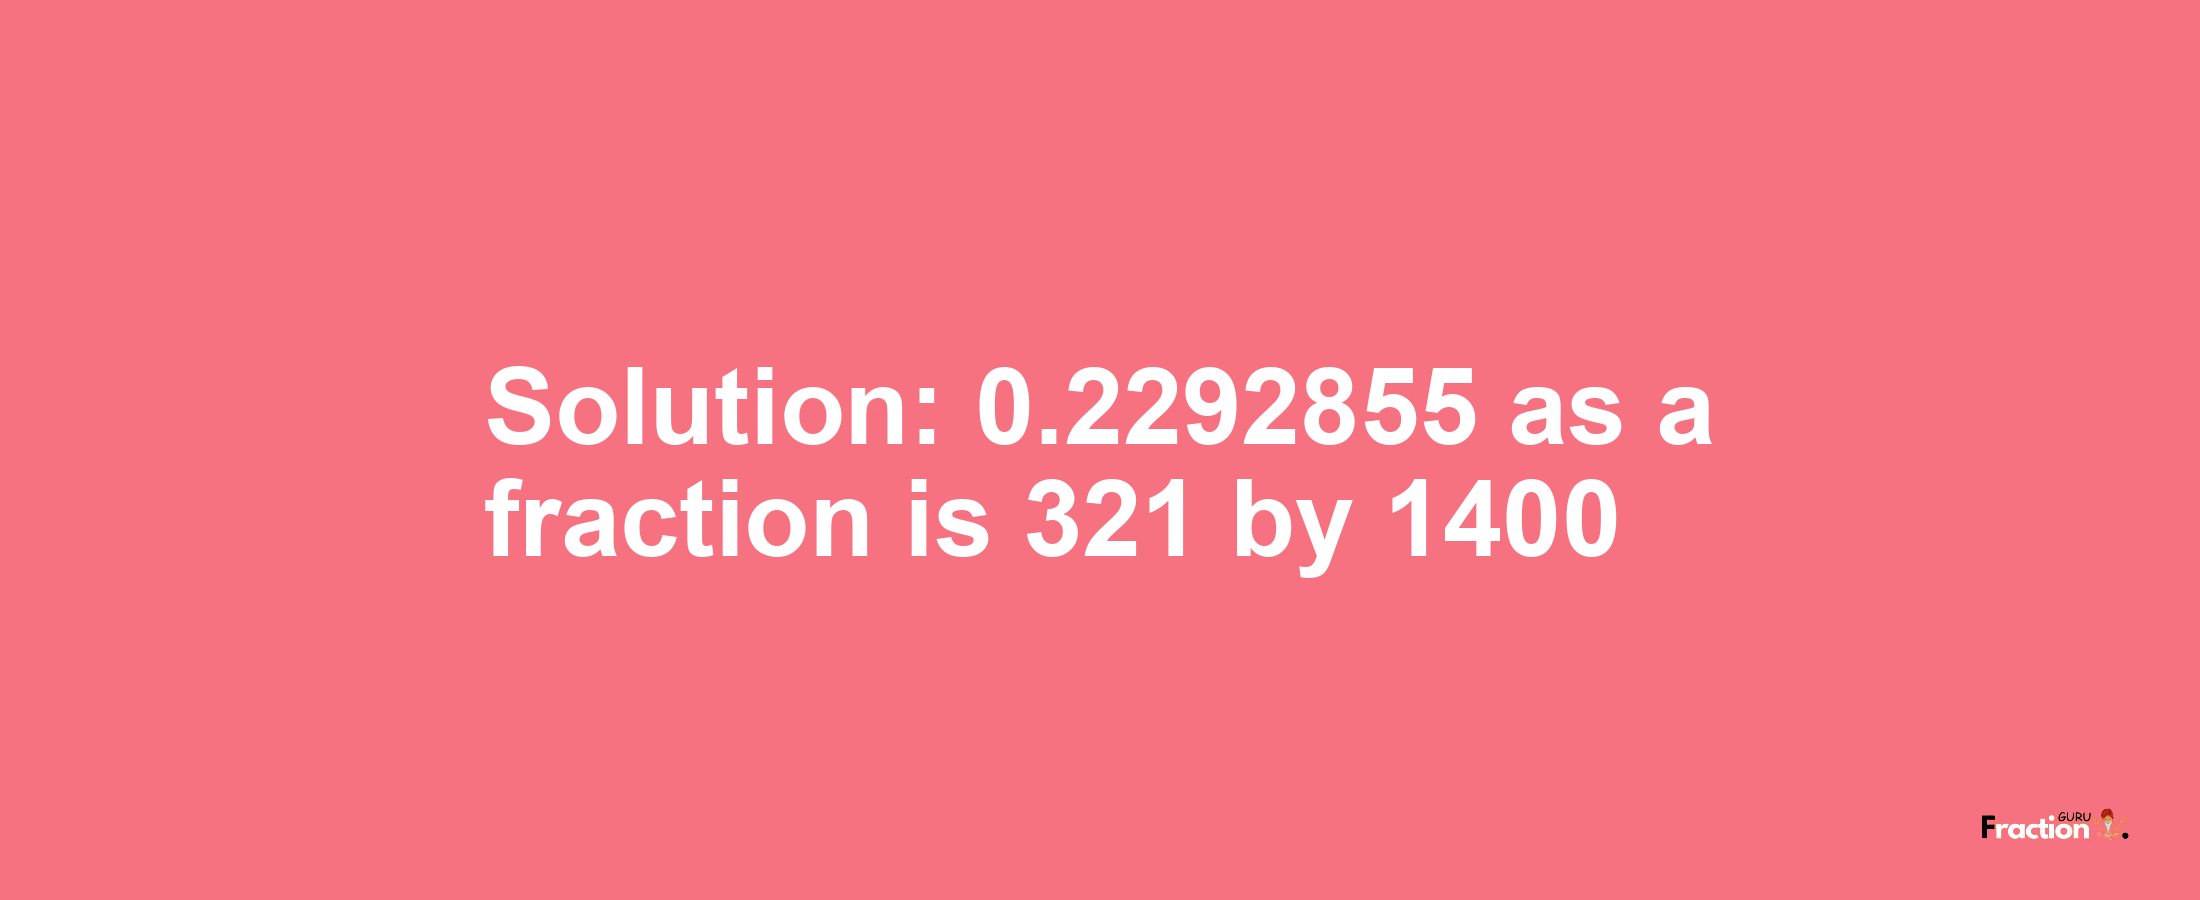 Solution:0.2292855 as a fraction is 321/1400